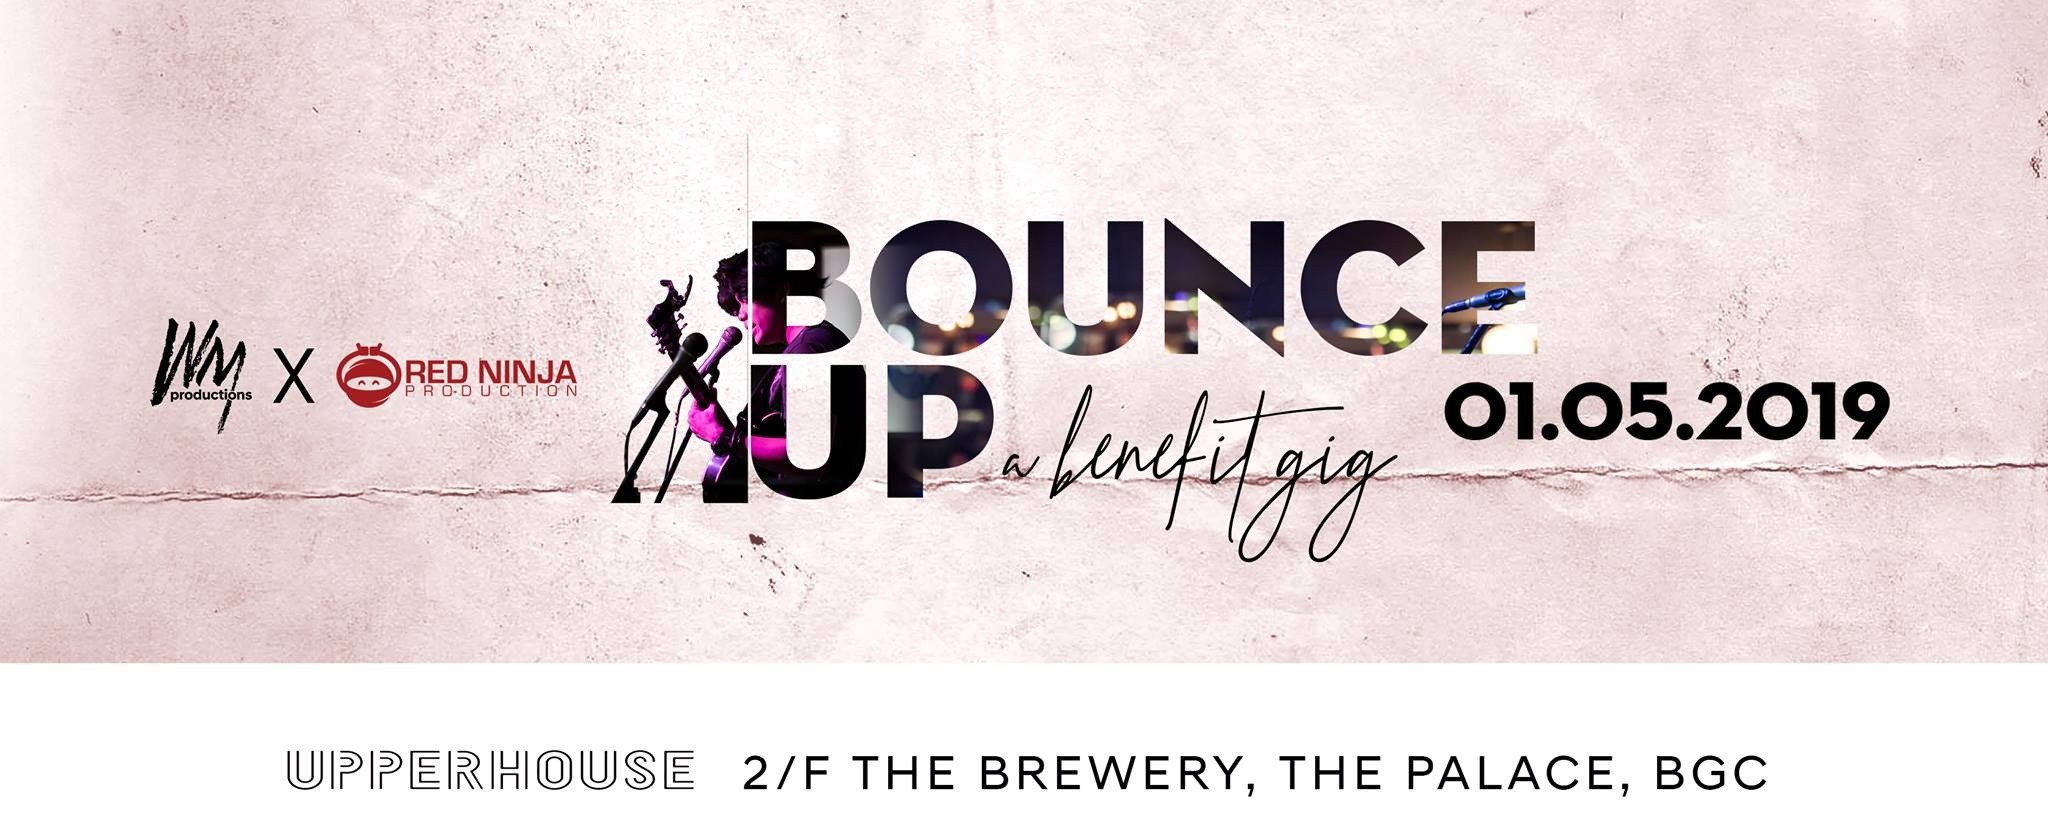 Bounce Up | A Benefit Gig